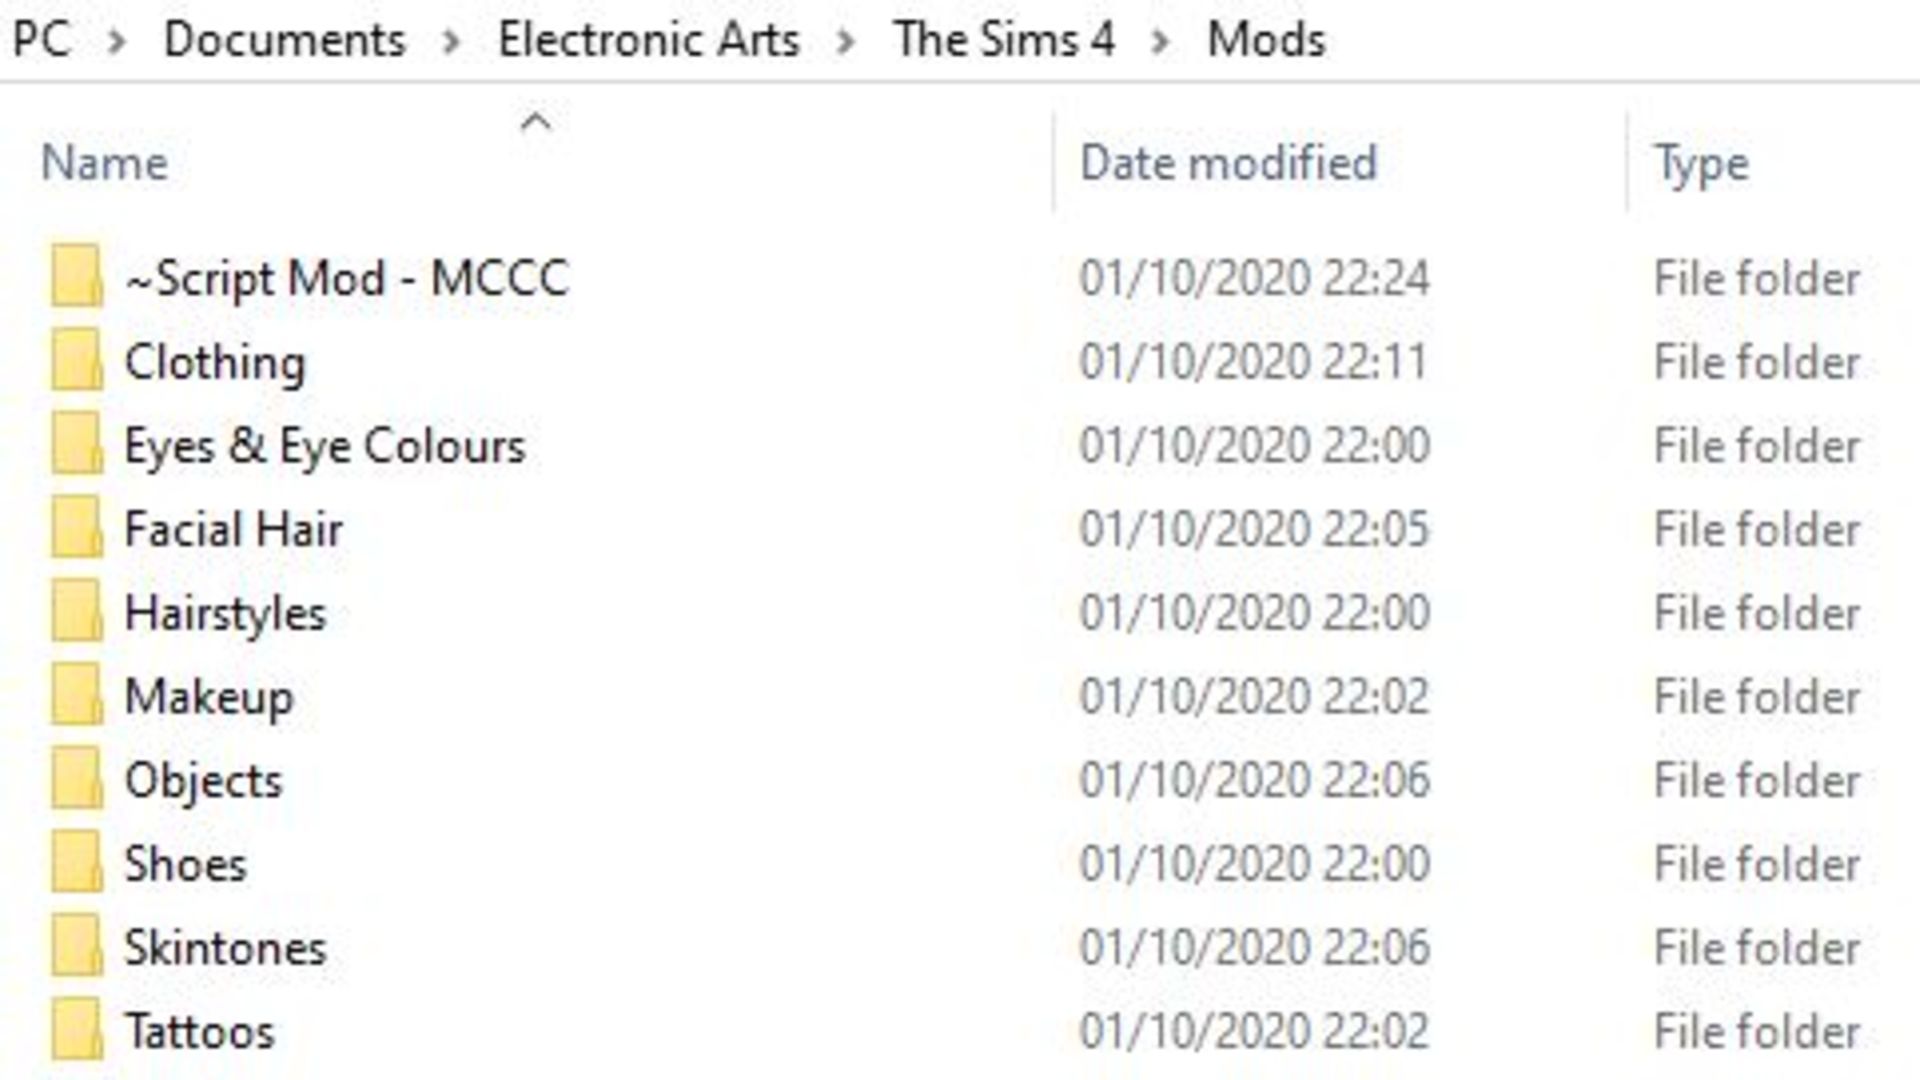 How To Download Sims 4 For Free - Full Guide 